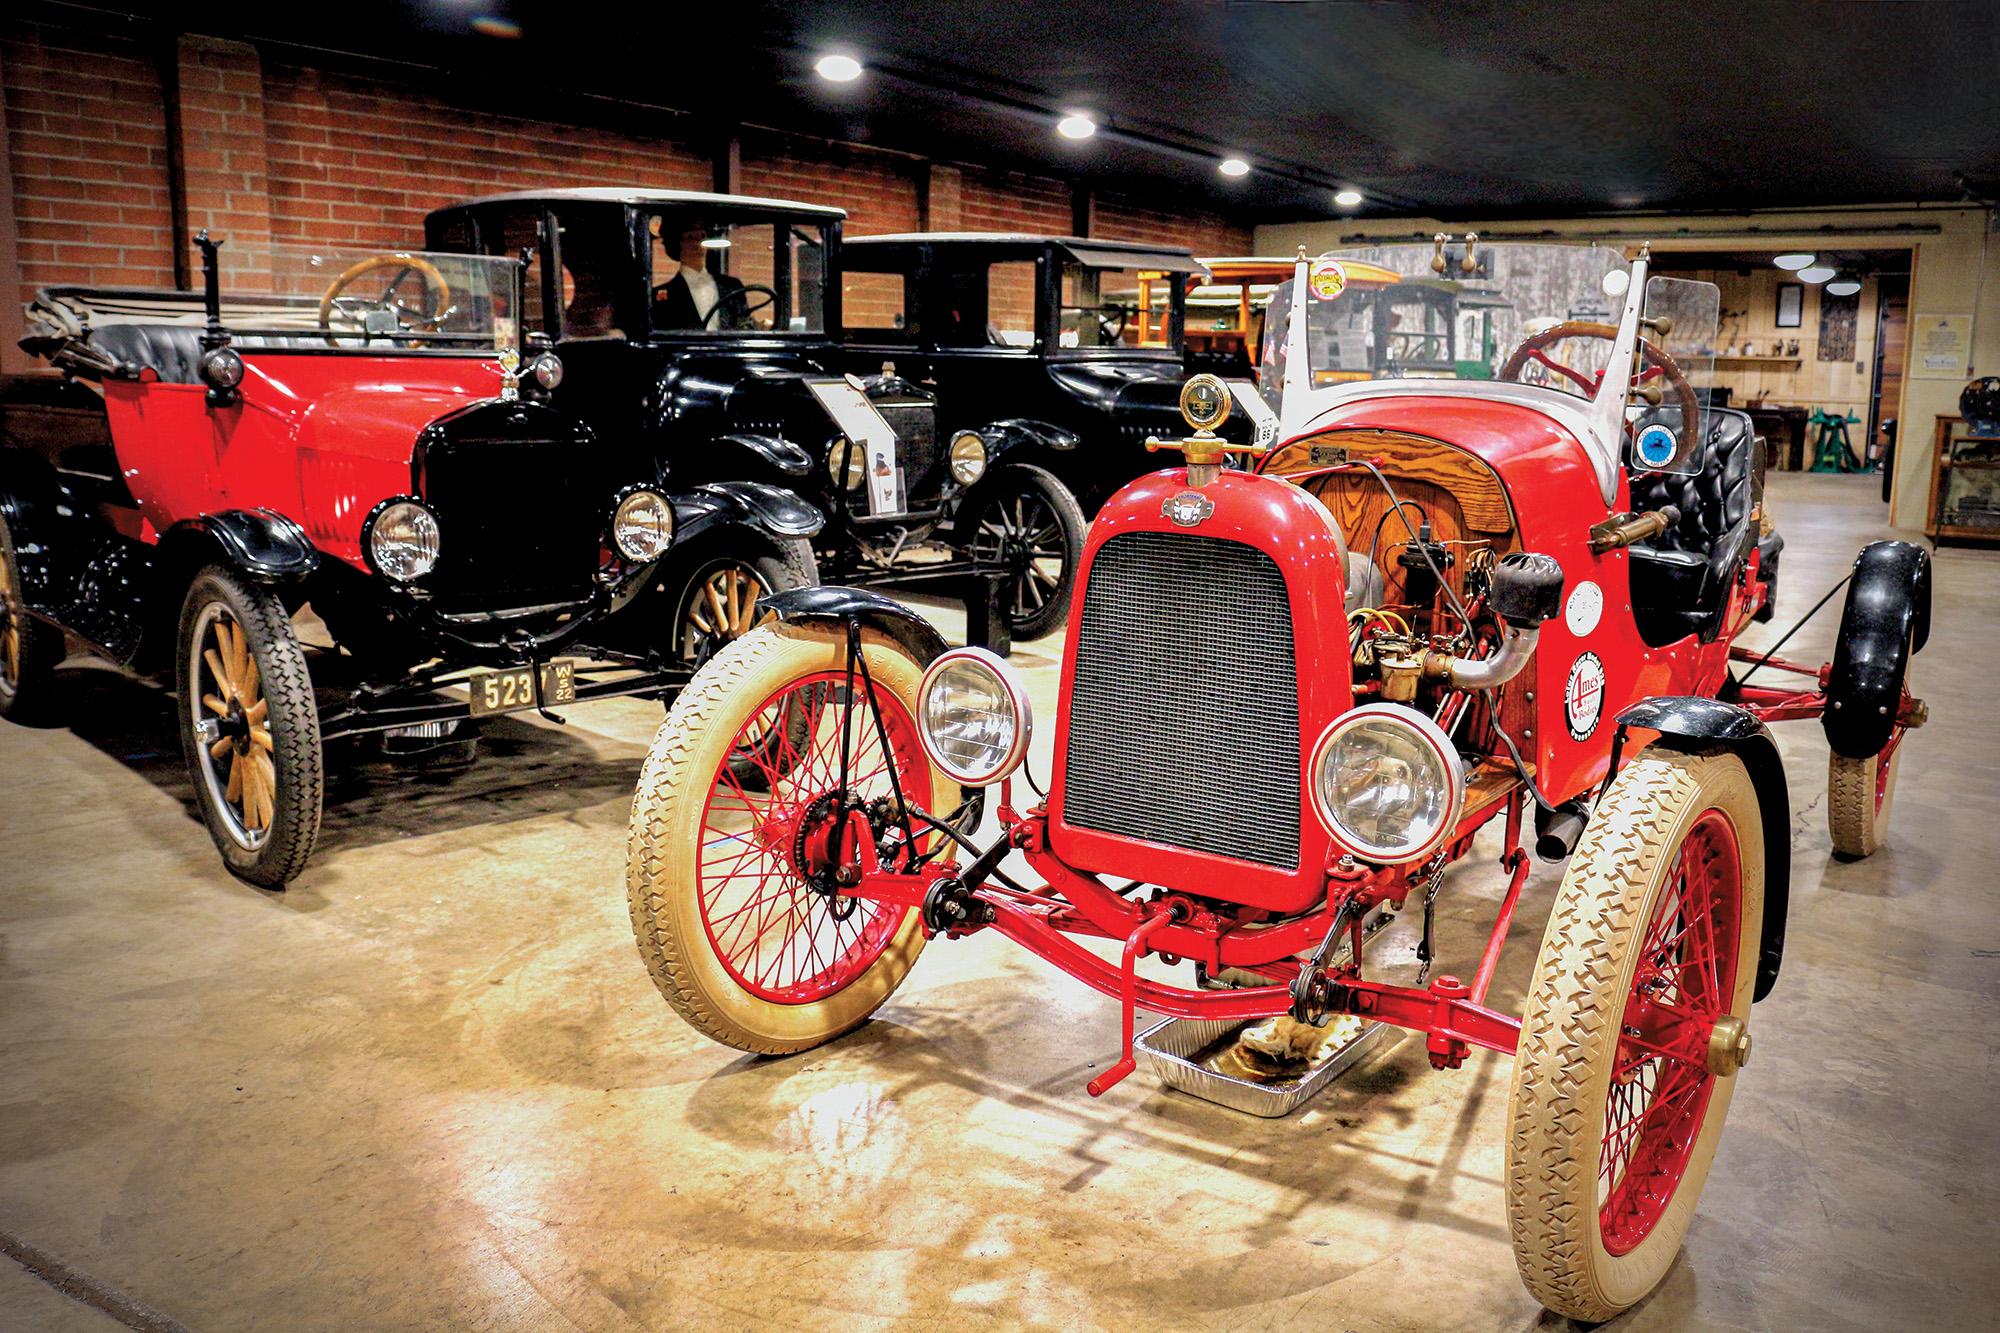 A Visit to the Model T Museum in Richmond, Indiana